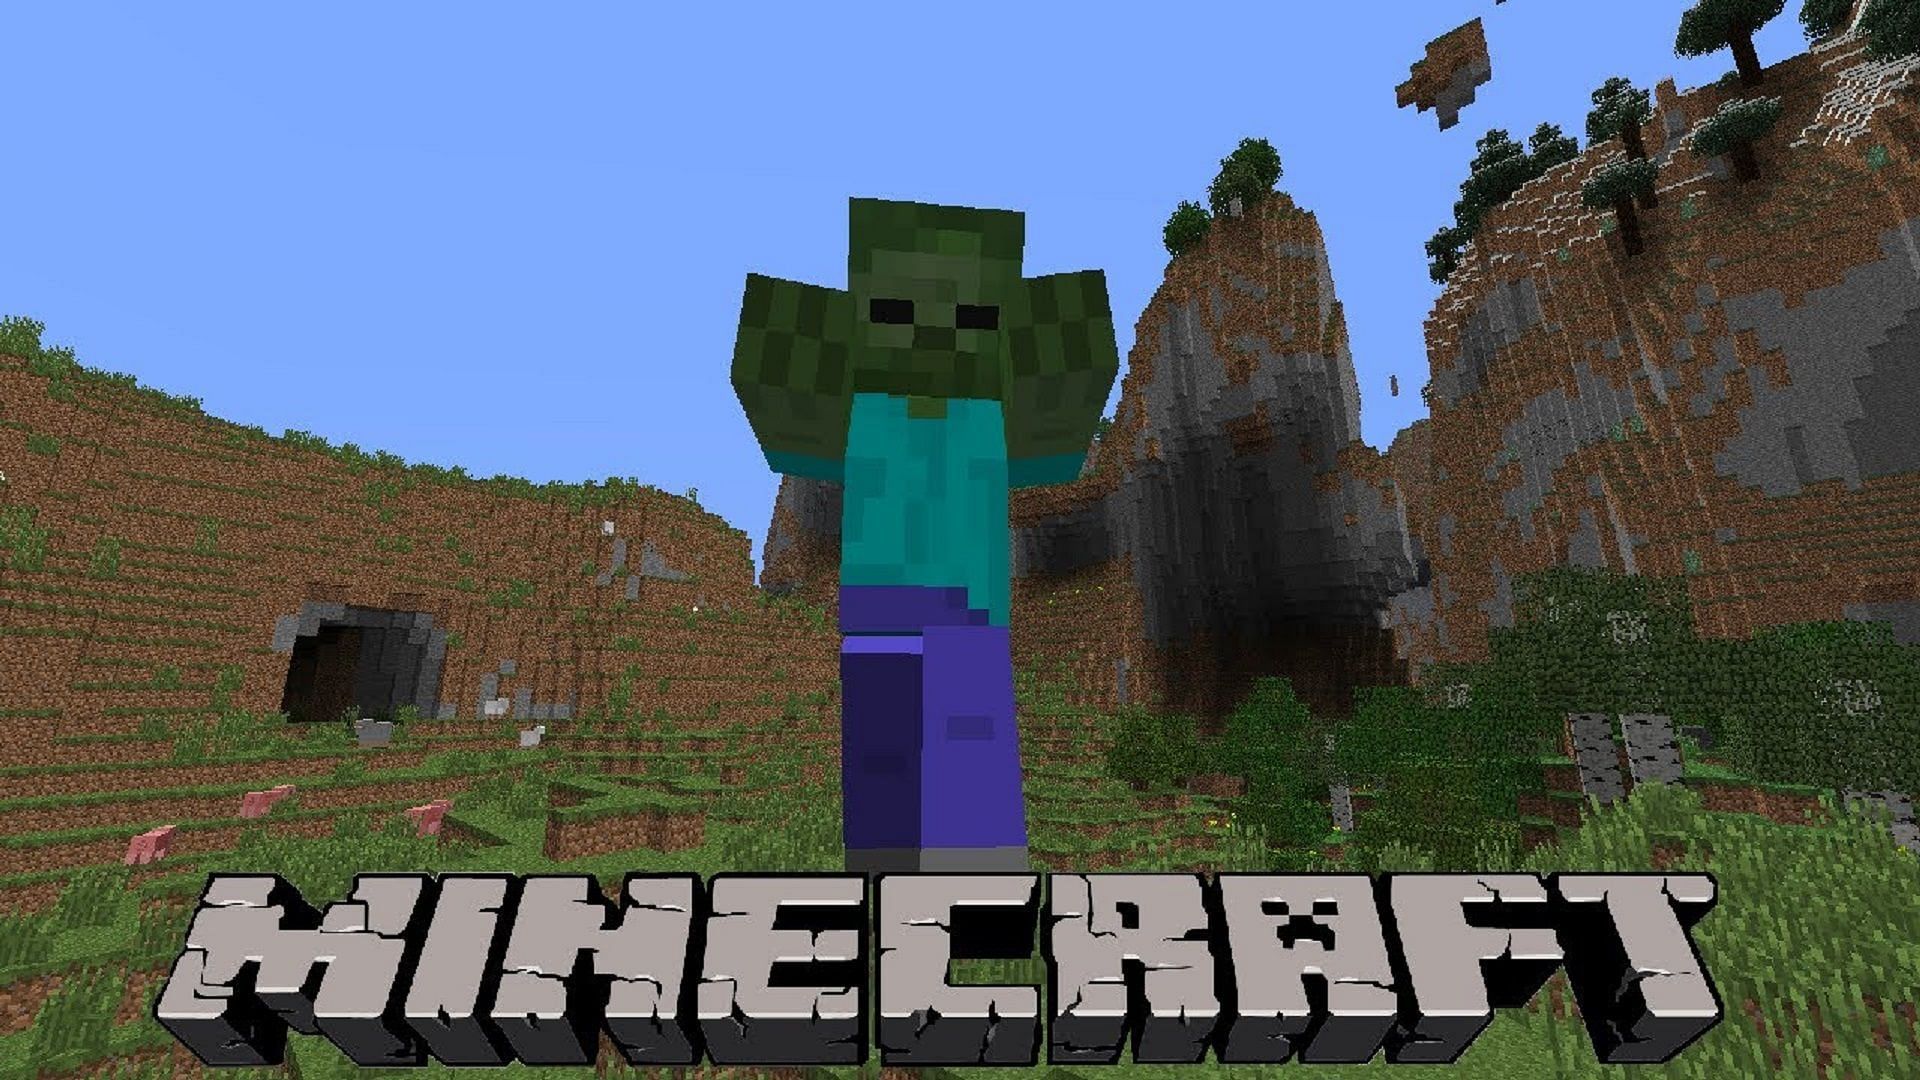 The giant zombie in Minecraft (Image via AchievedGaming/YouTube)